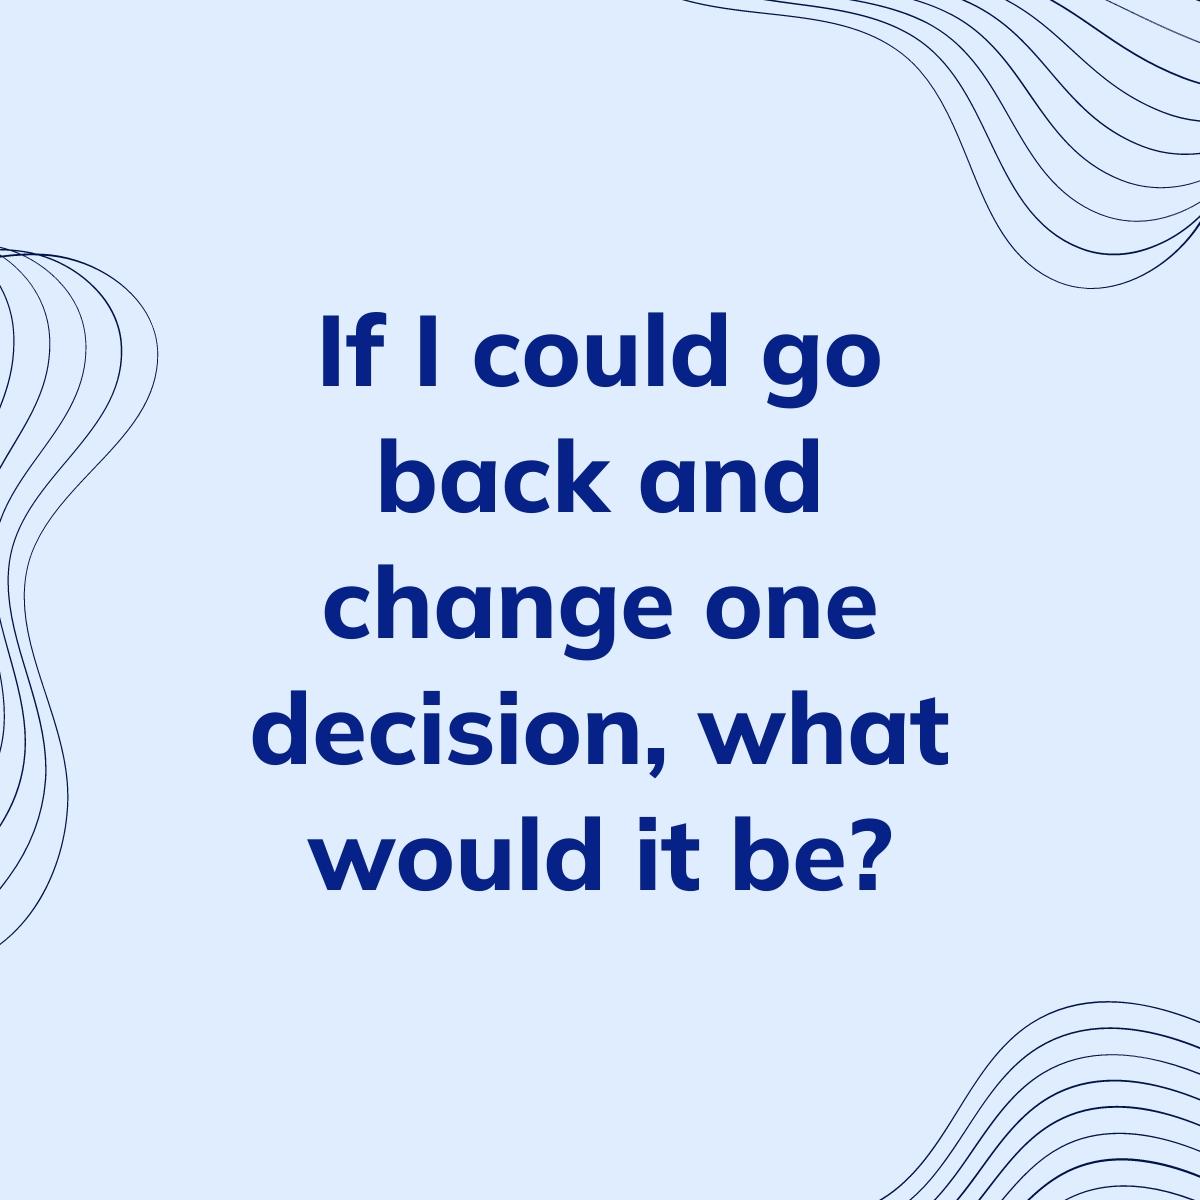 Journal Prompt: If I could go back and change one decision, what would it be?